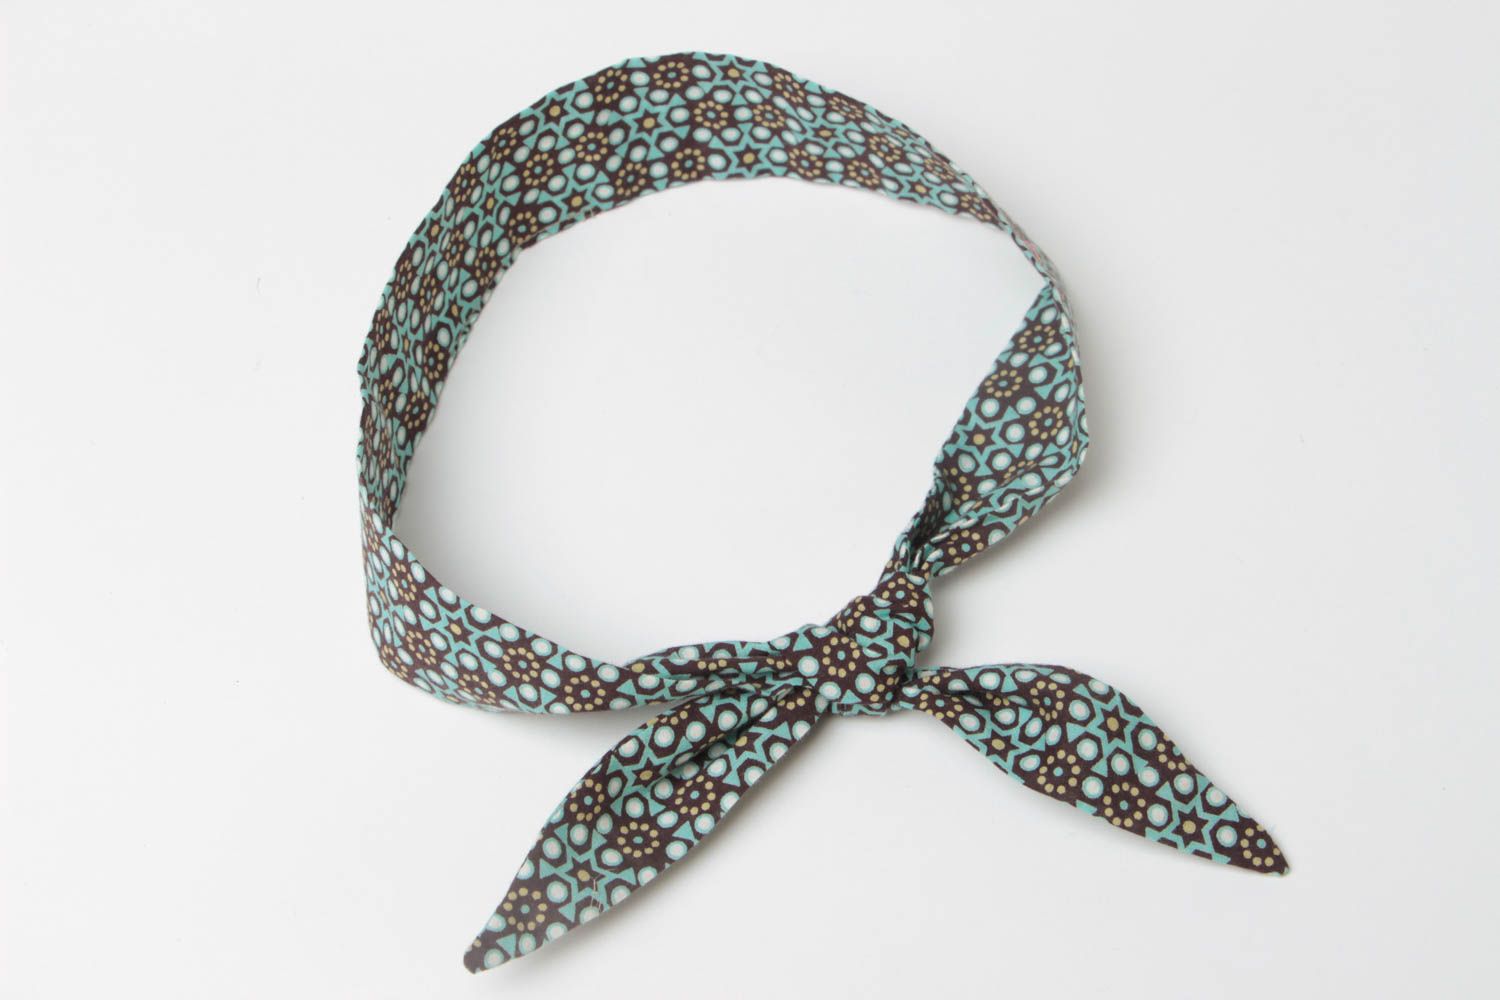 Handmade flexible colorful fabric dolly bow headband in blue and brown colors photo 4